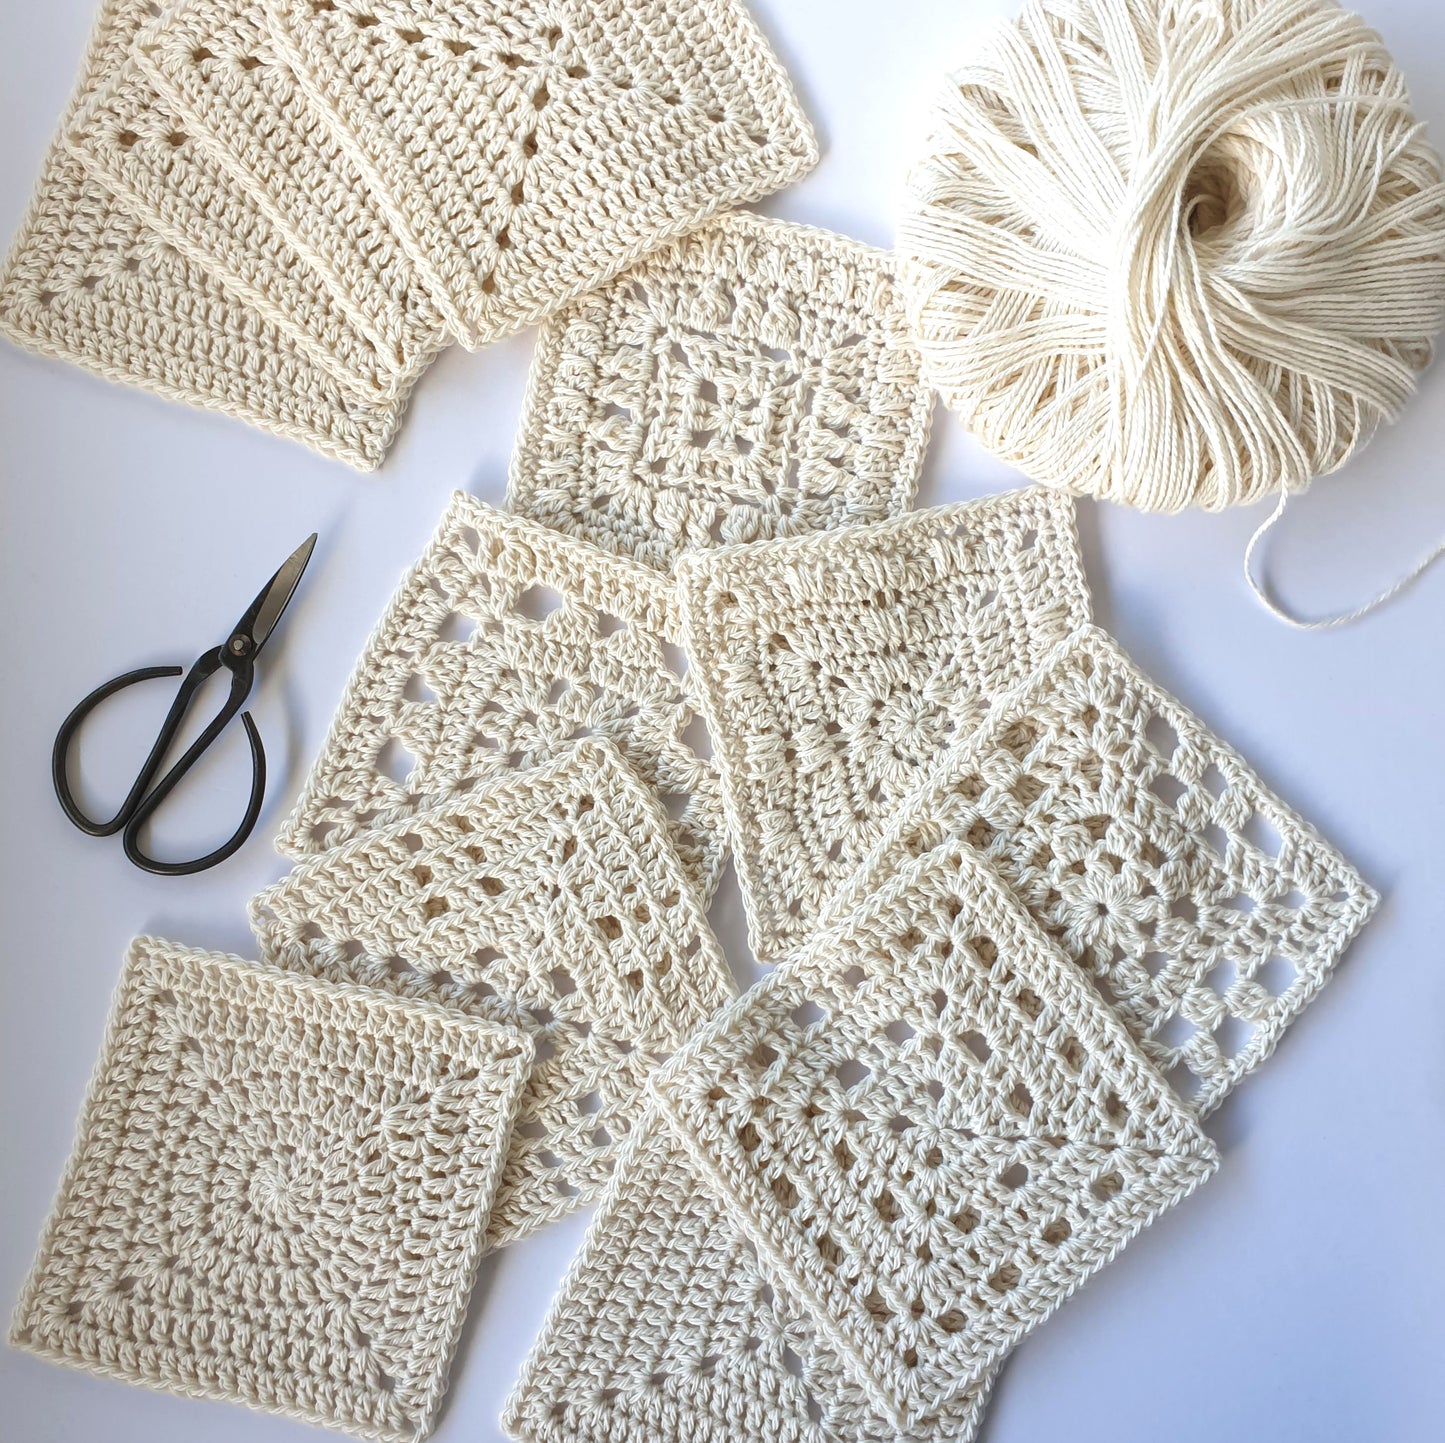 Cream granny squares with a ball of cream yarn and a pair of black yarn scissors from Granny Square Academy book by Shelley Husband